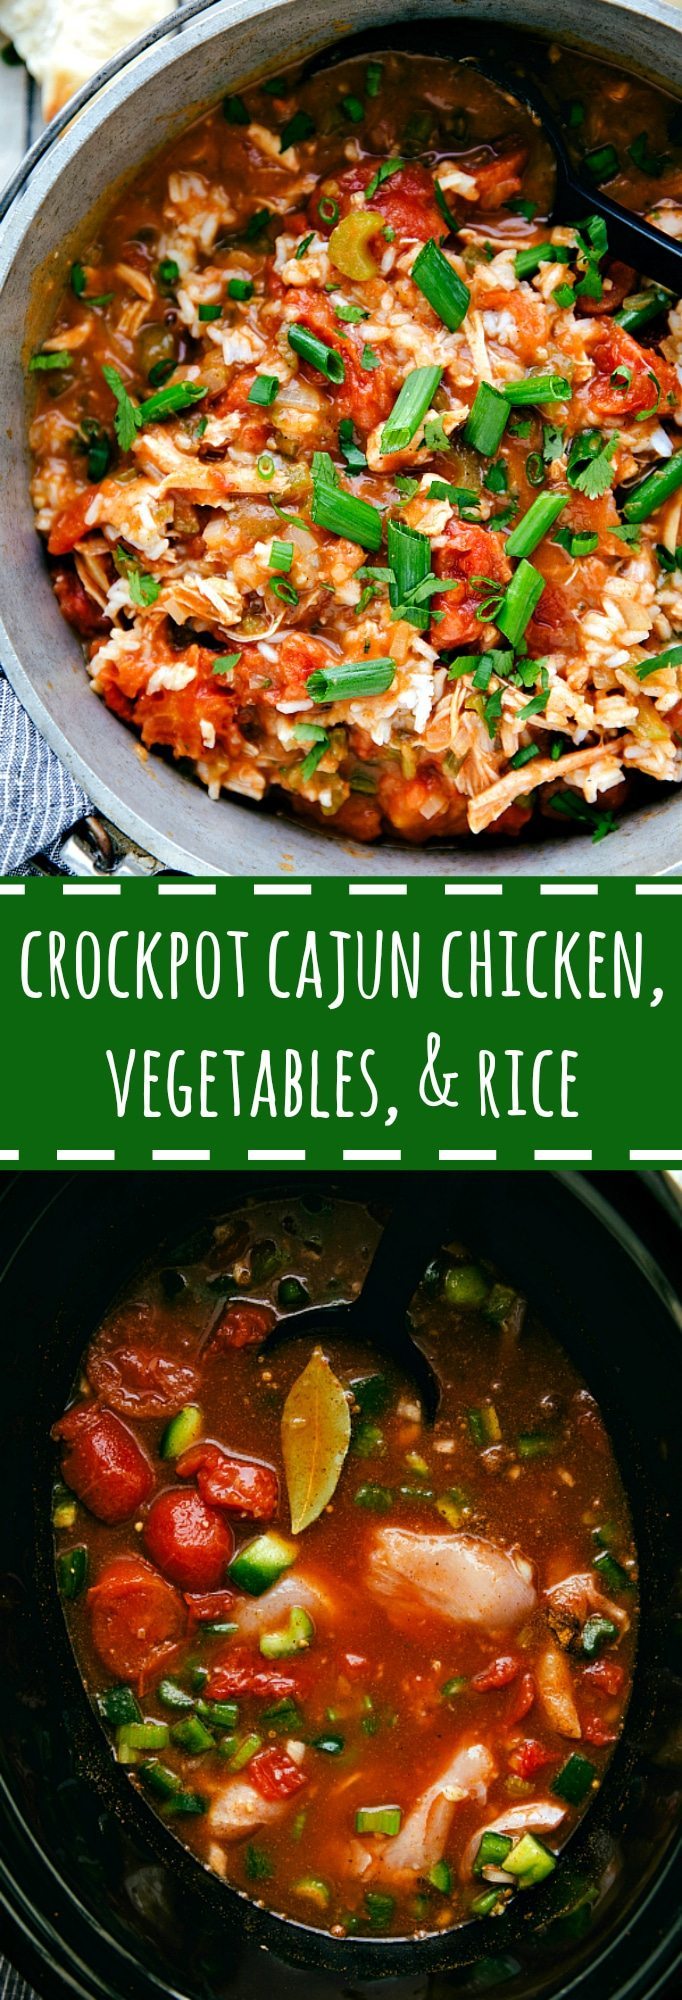 A very simple crockpot cajun chicken and vegetable dish. Serve it over rice for a delicious meal!